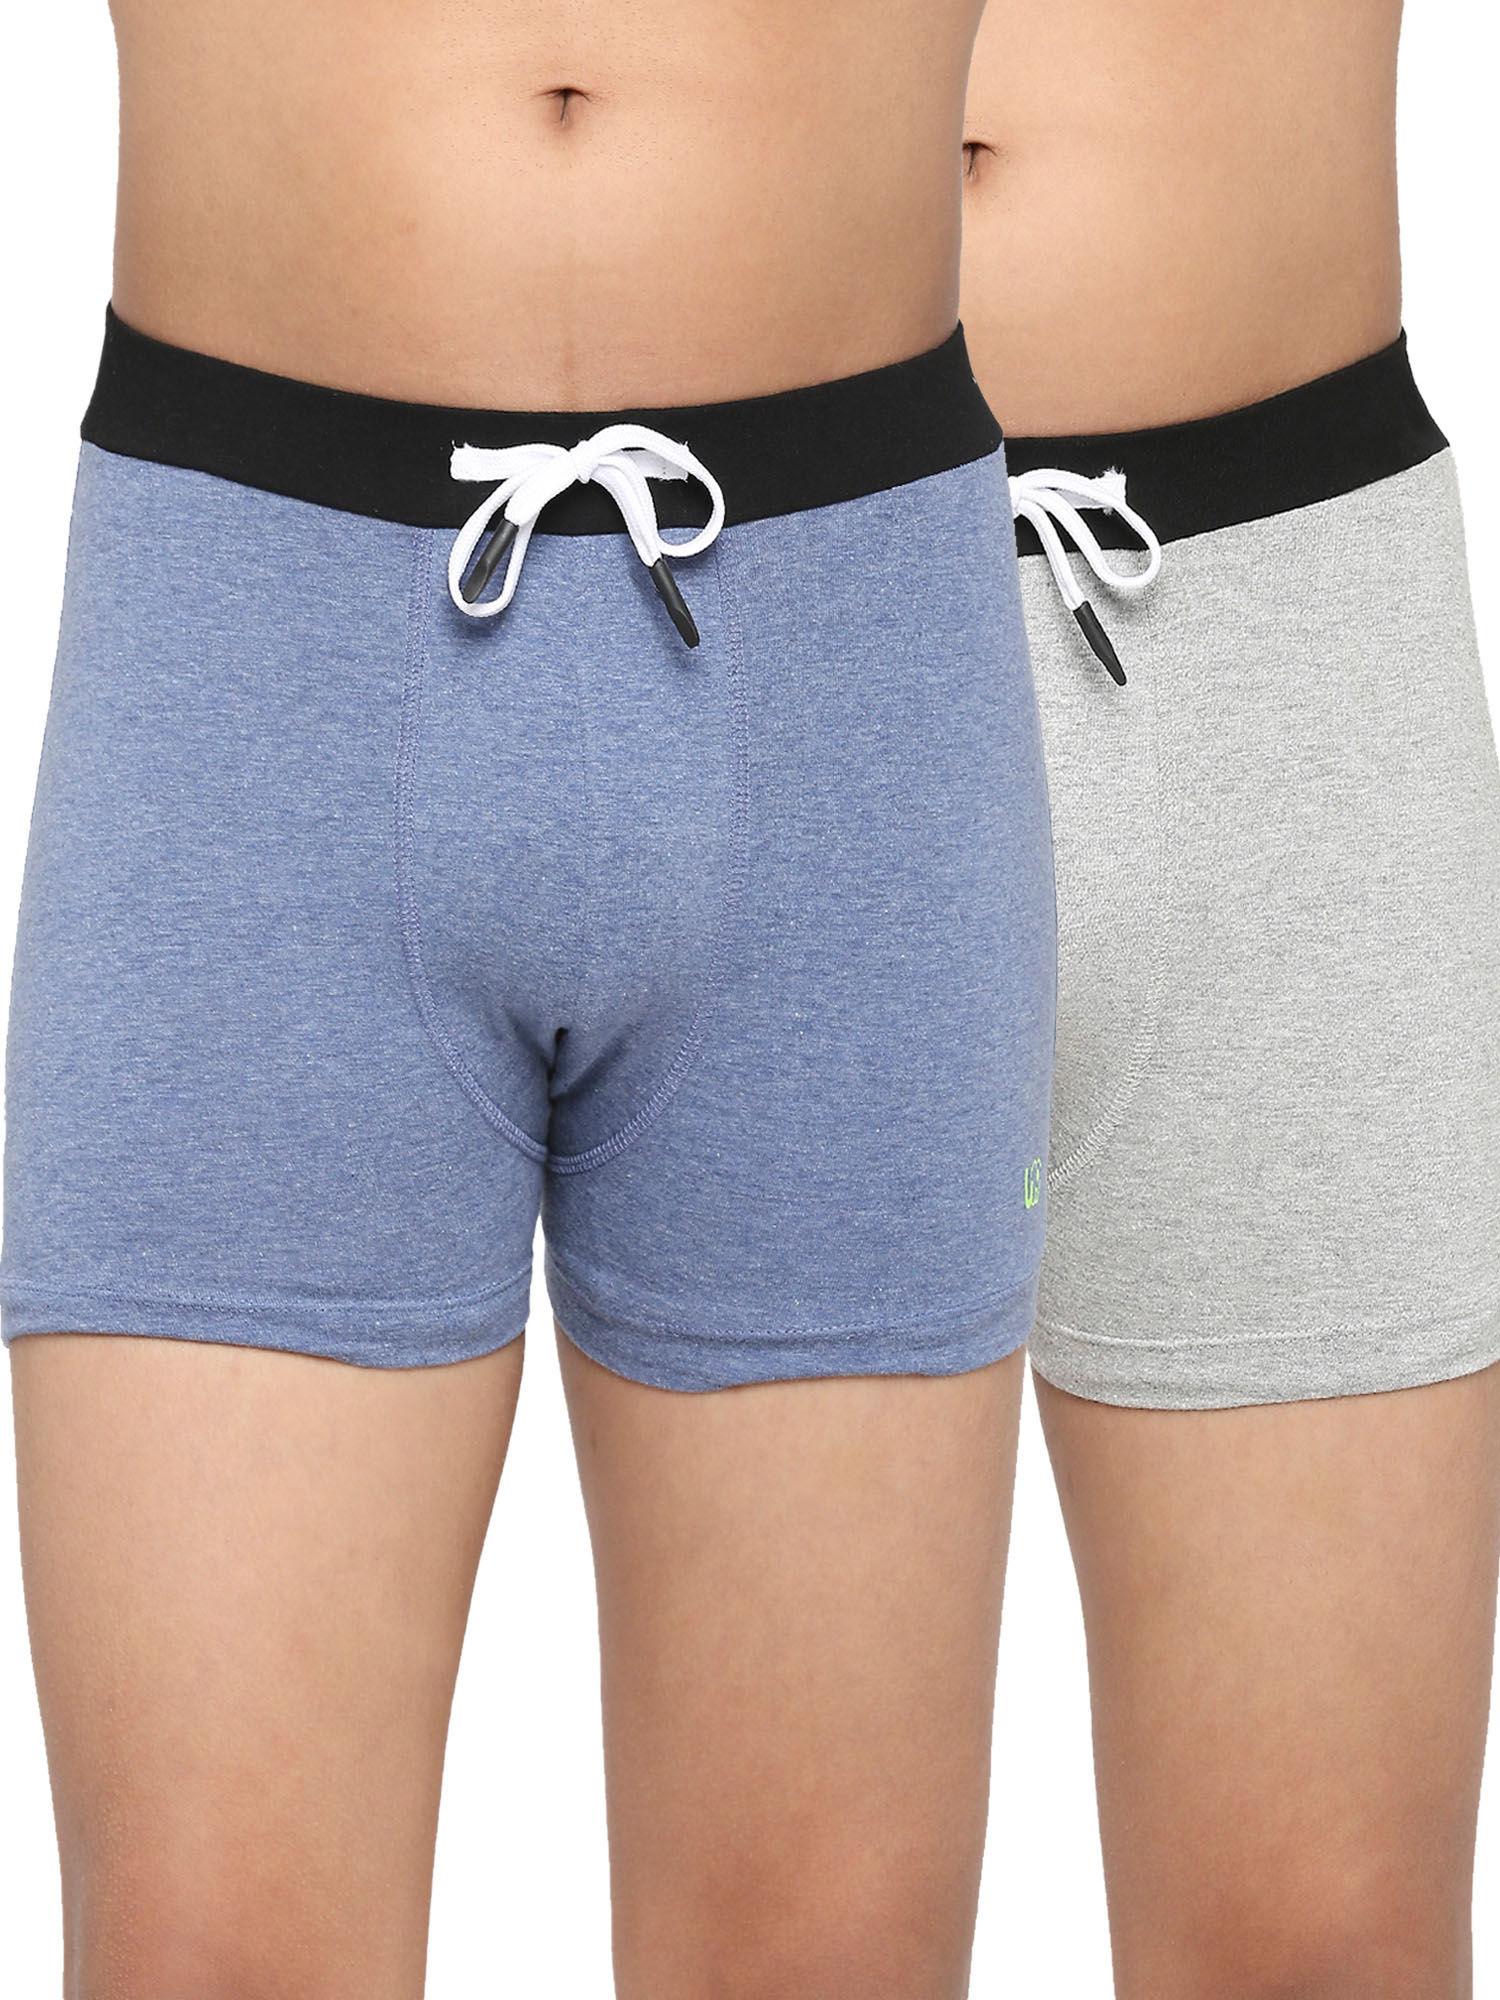 teenagers cotton trunk light grey and blue (pack of 2)